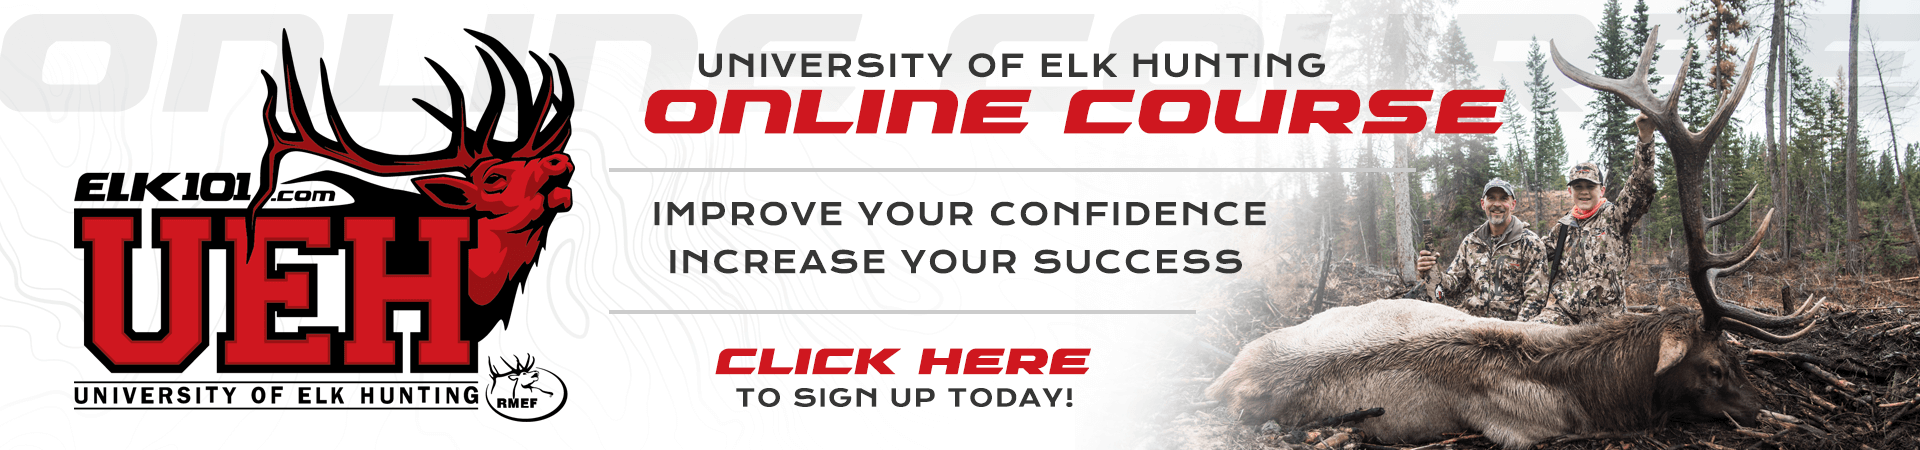 University-of-Elk-Hunting-Online-Course-Ad